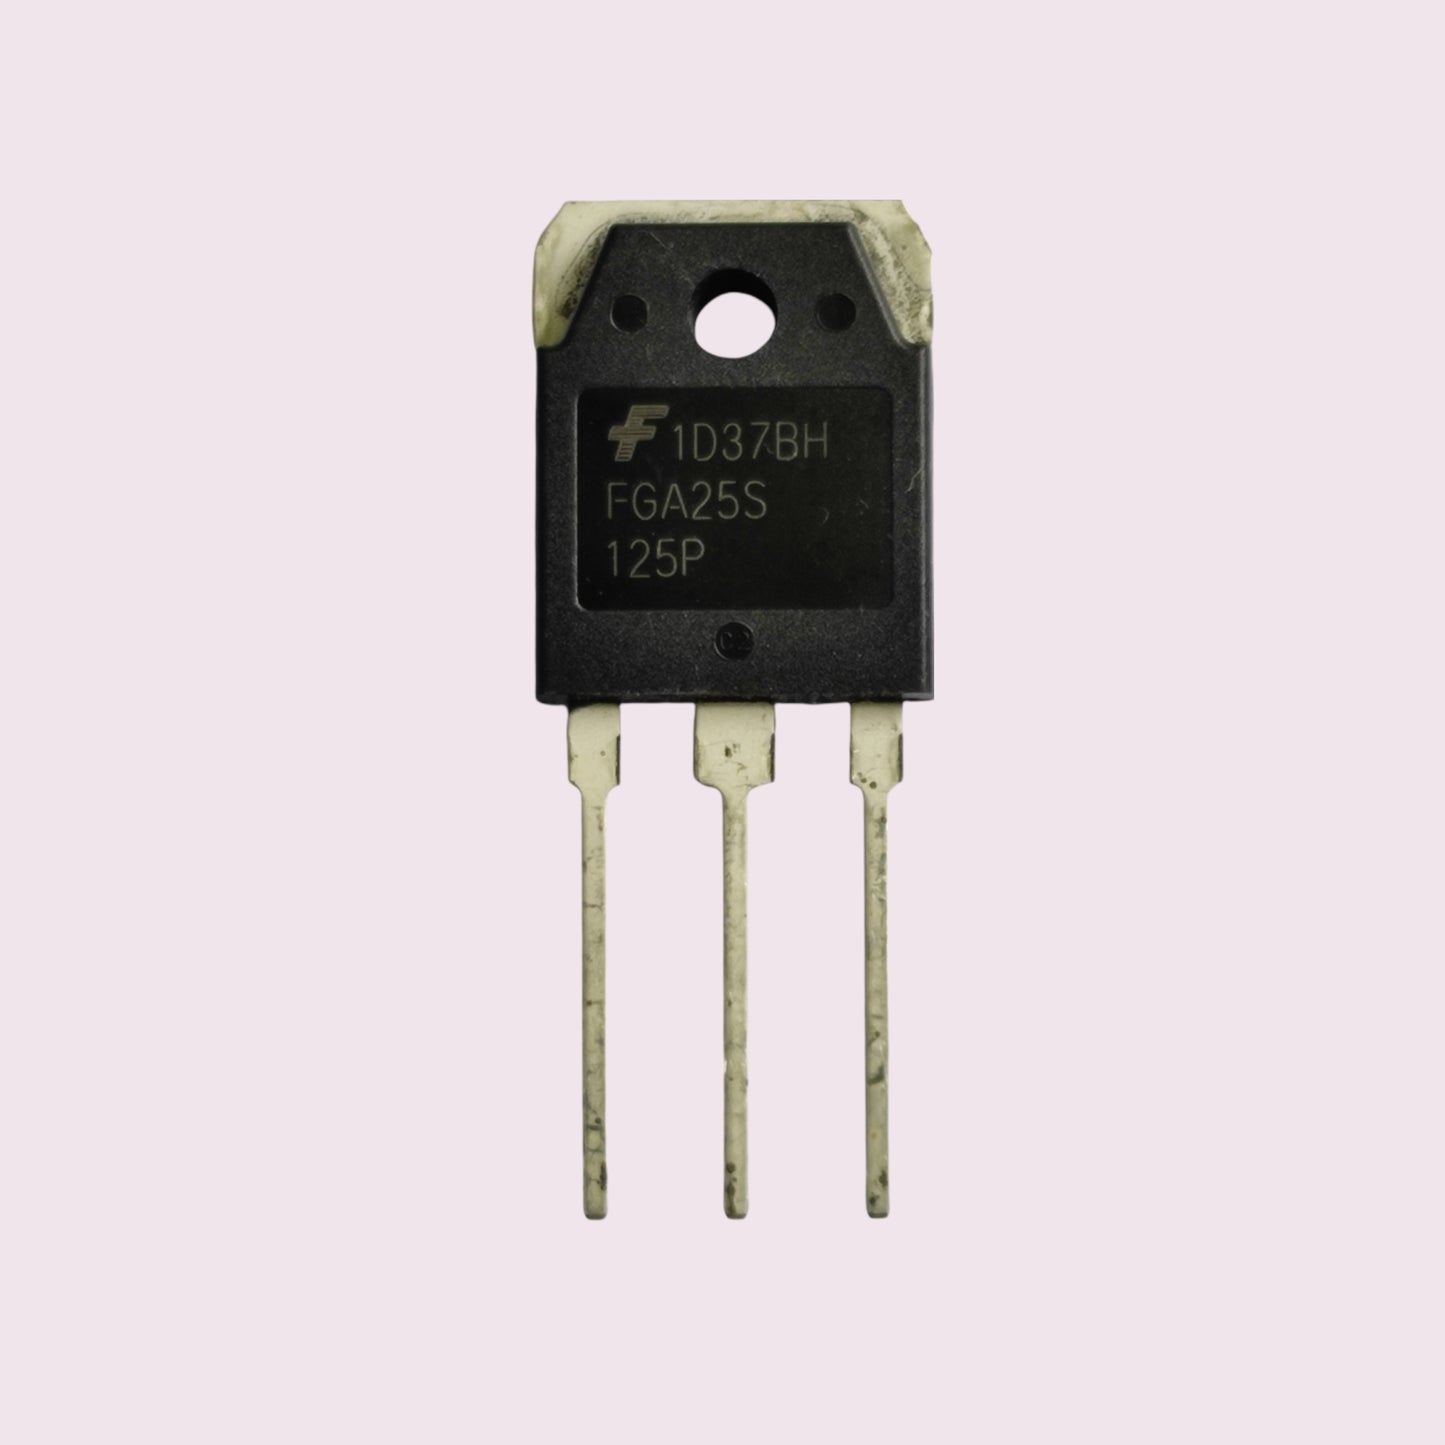 IGBT FGA 25S 125 P15P used for Induction Stove